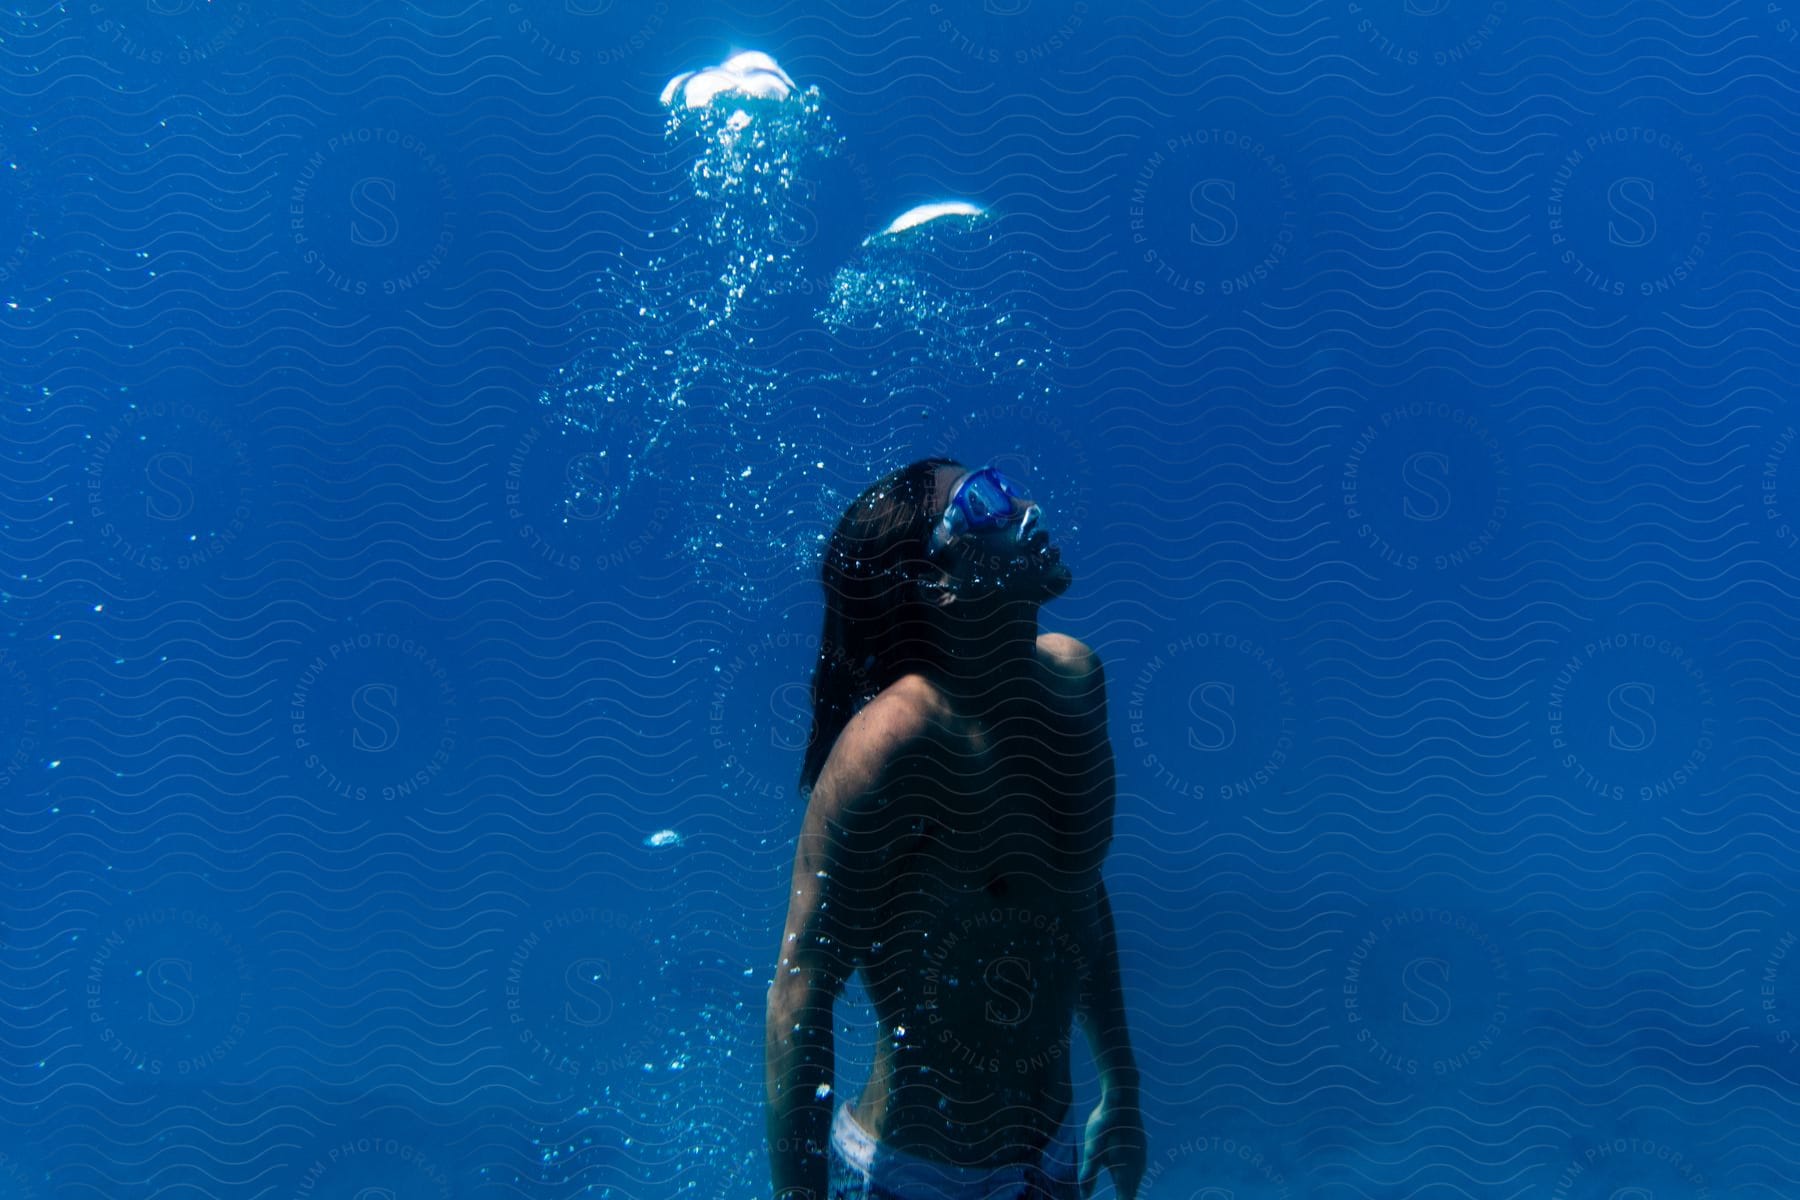 A man diving underwater on a sunny day